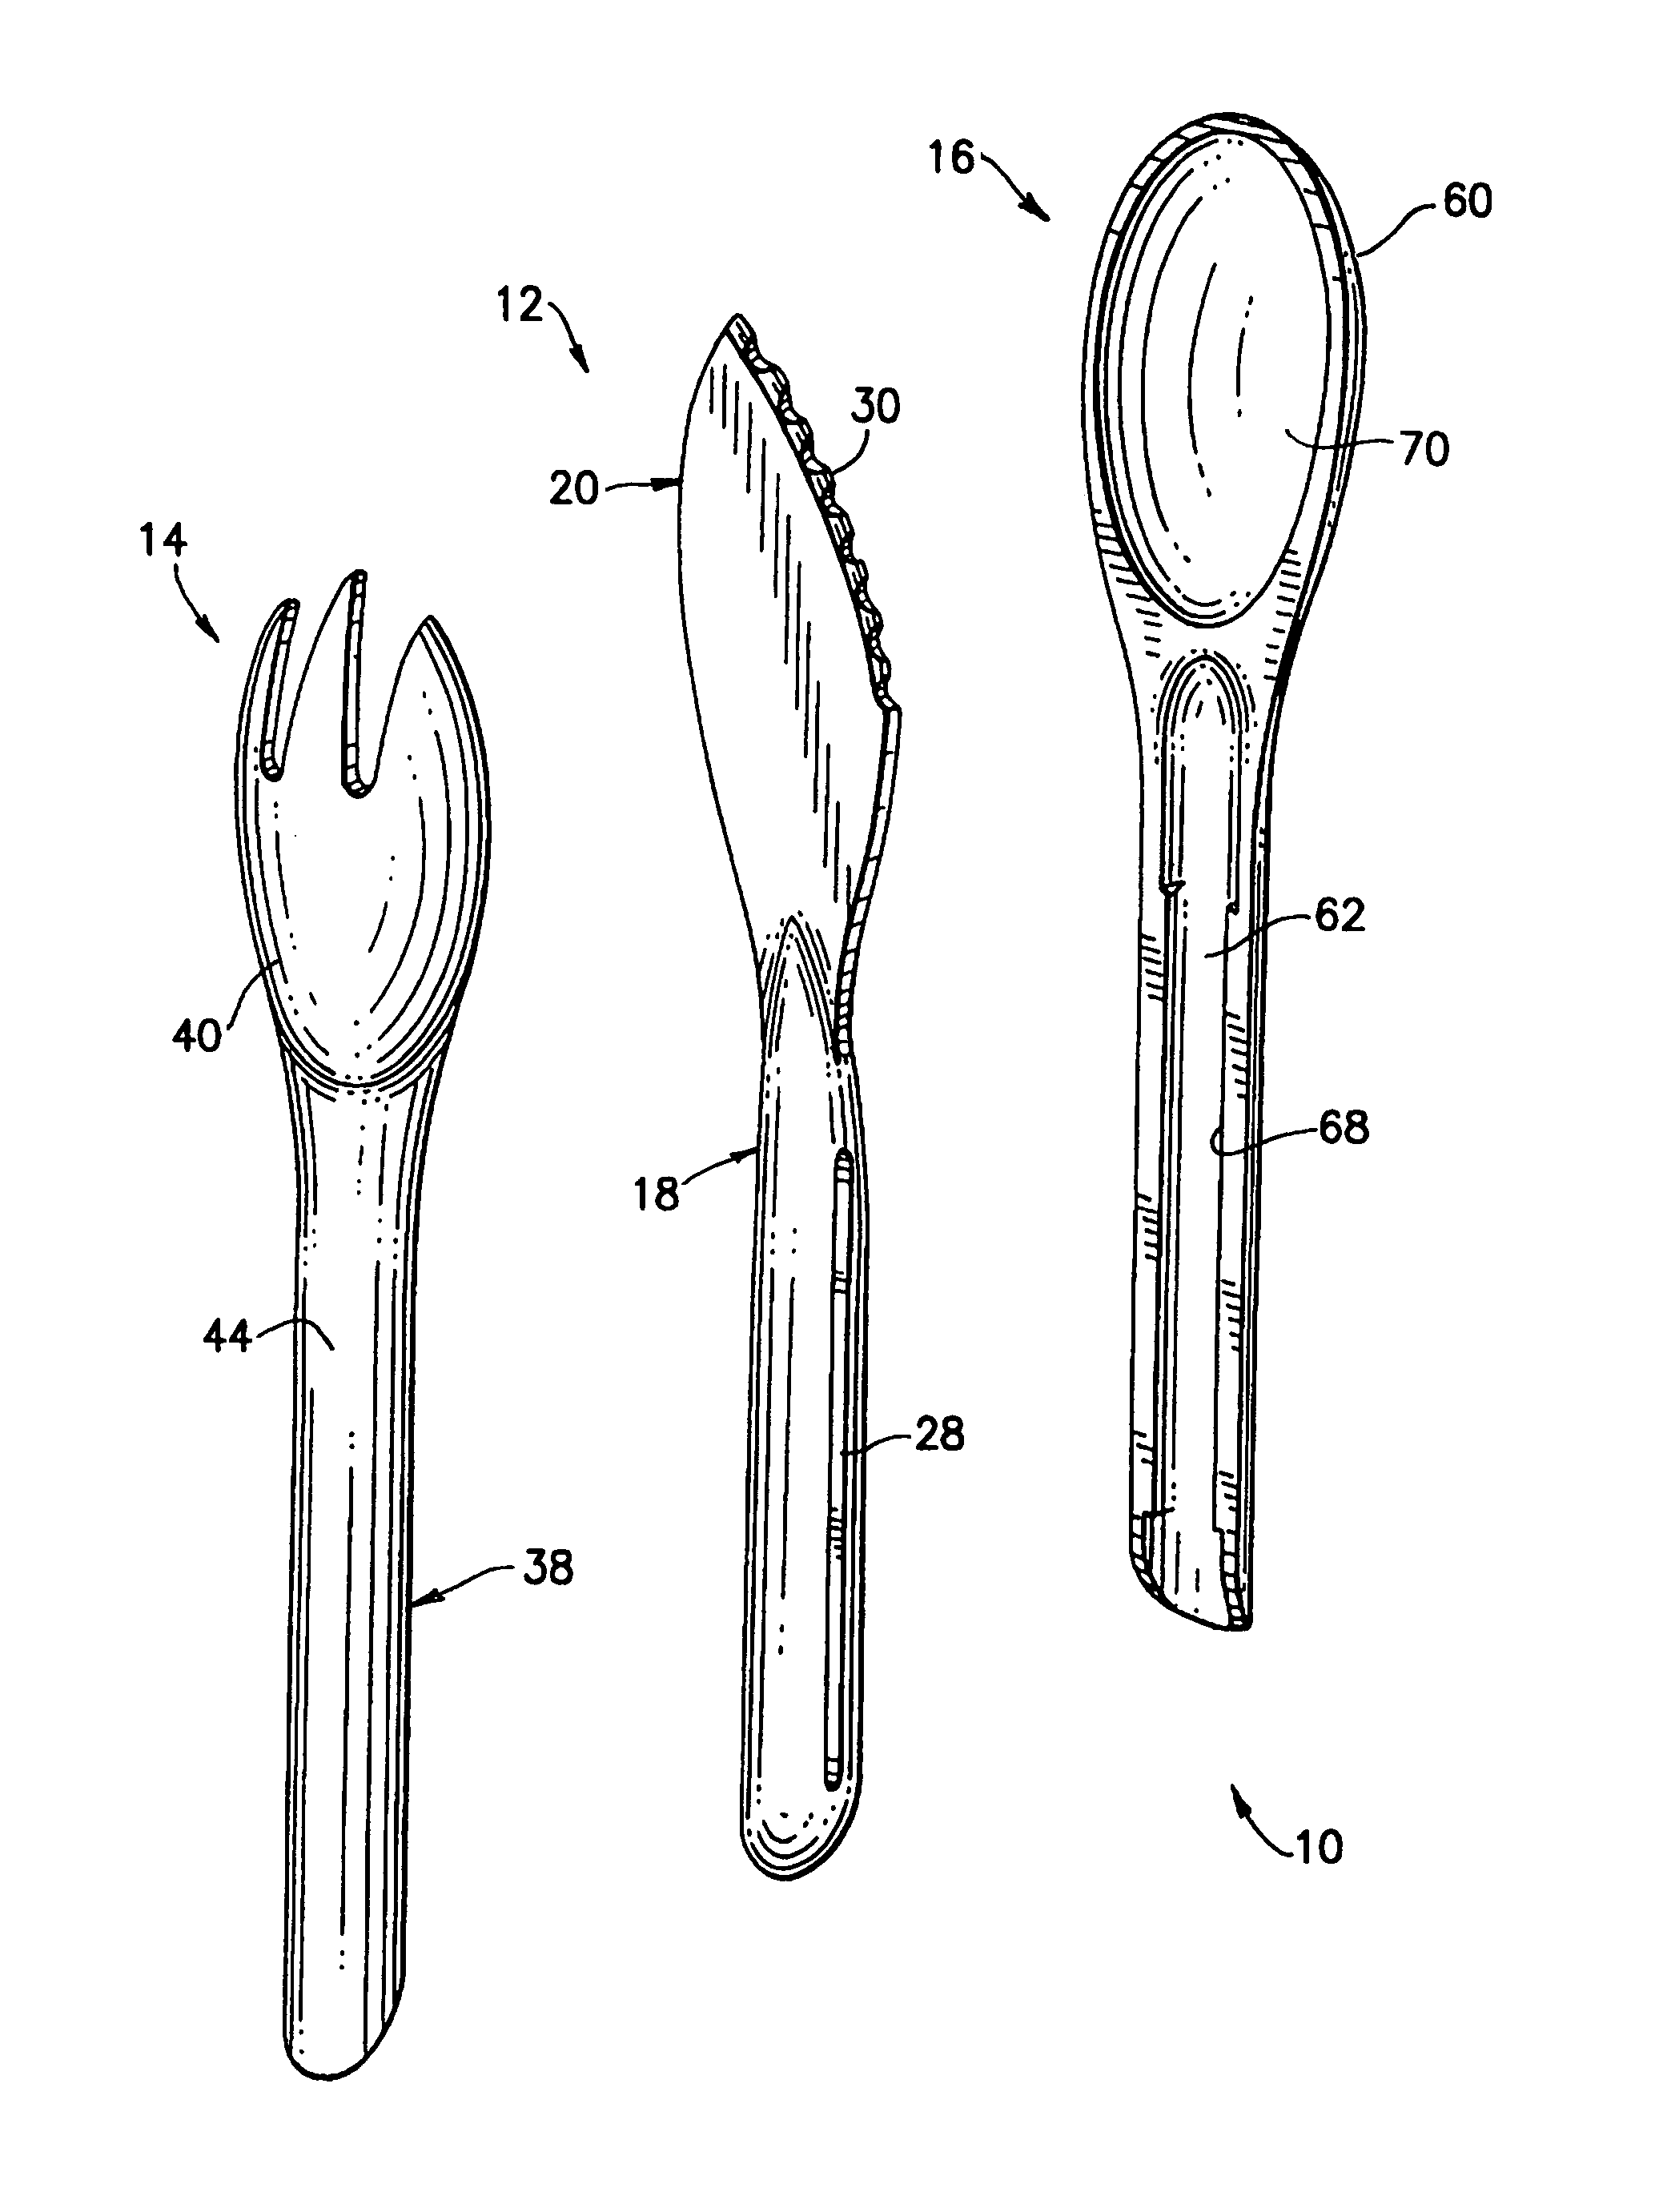 Snap-together eating utensil assembly